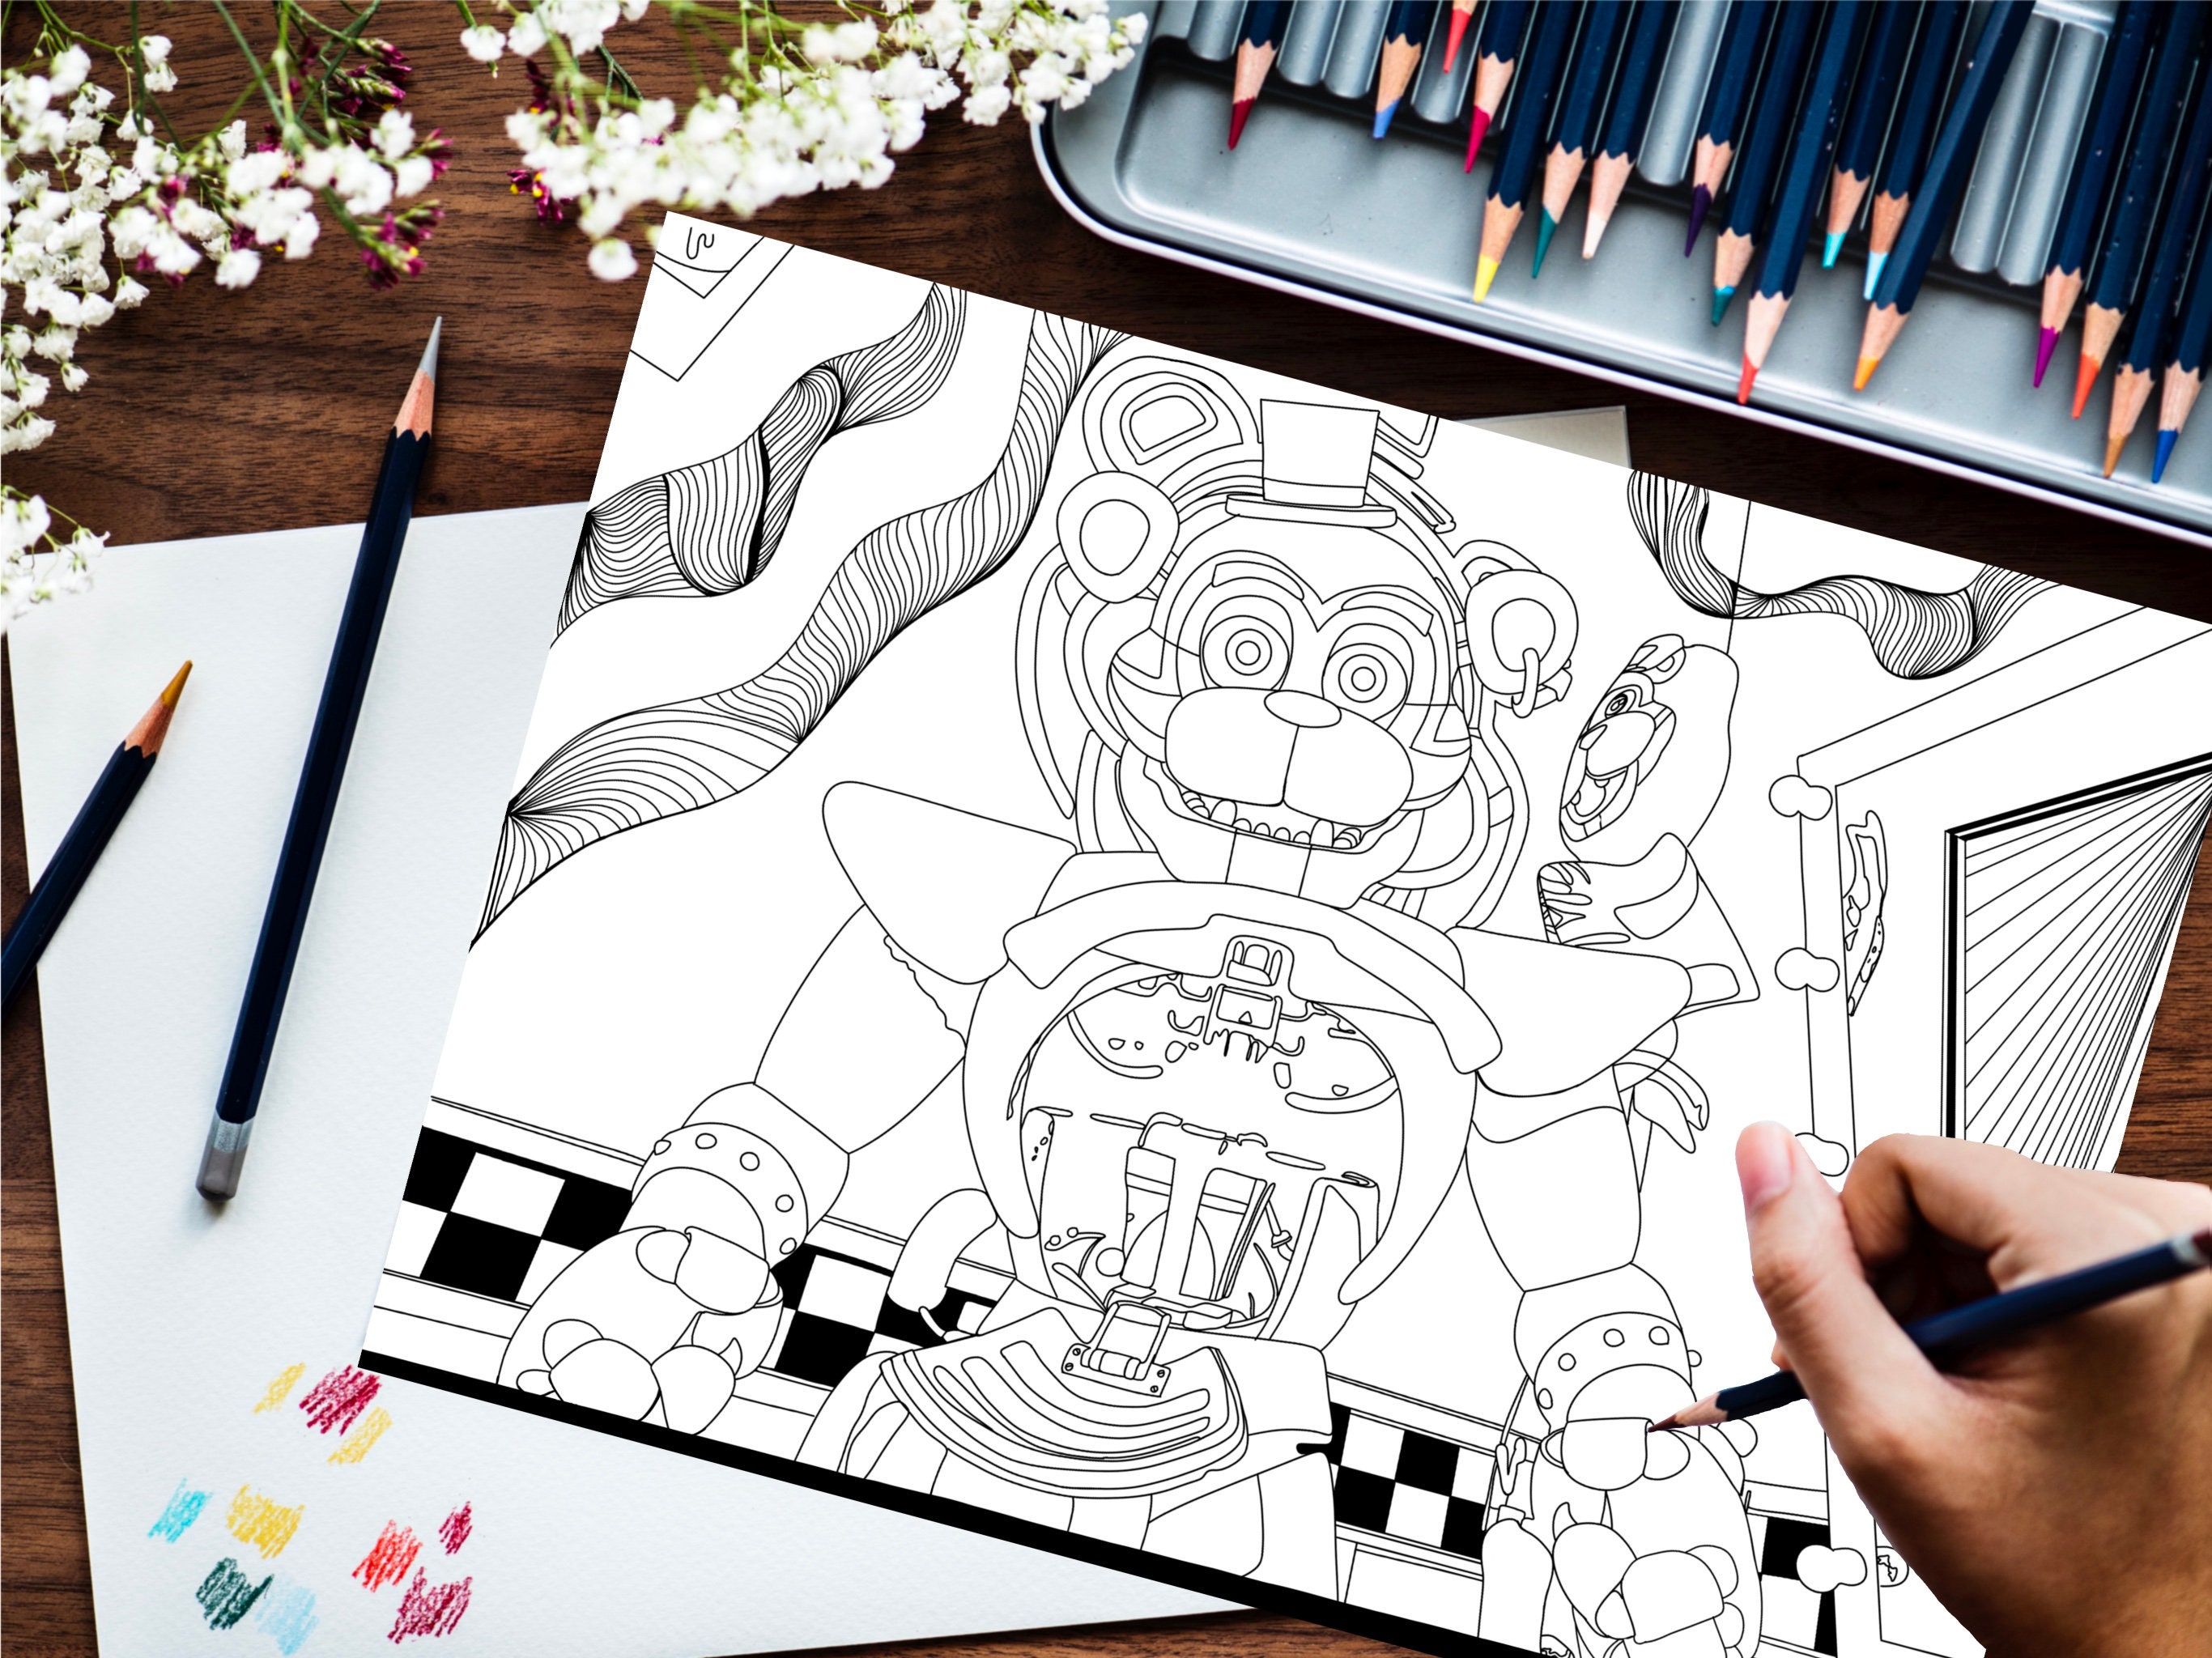 Various Five Nights At Freddy's Coloring Pages PDF To Your Kids